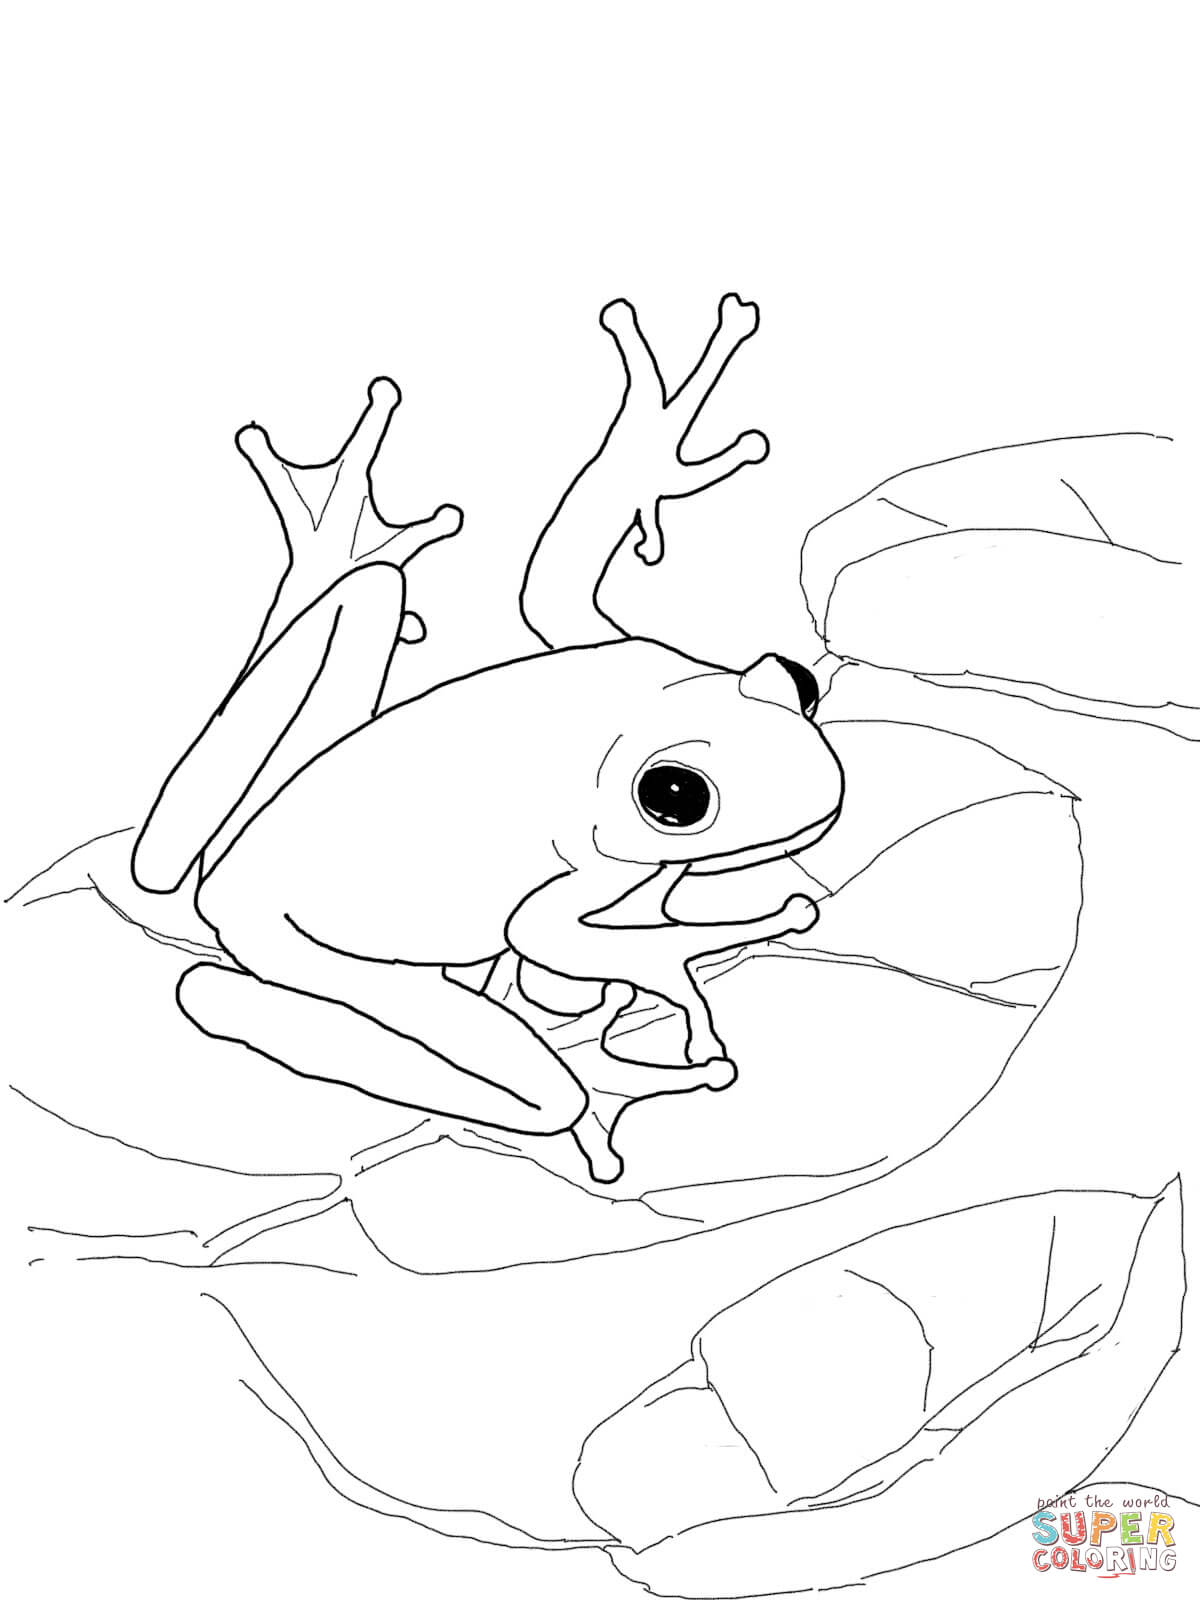 Frogs coloring pages | Free Coloring Pages